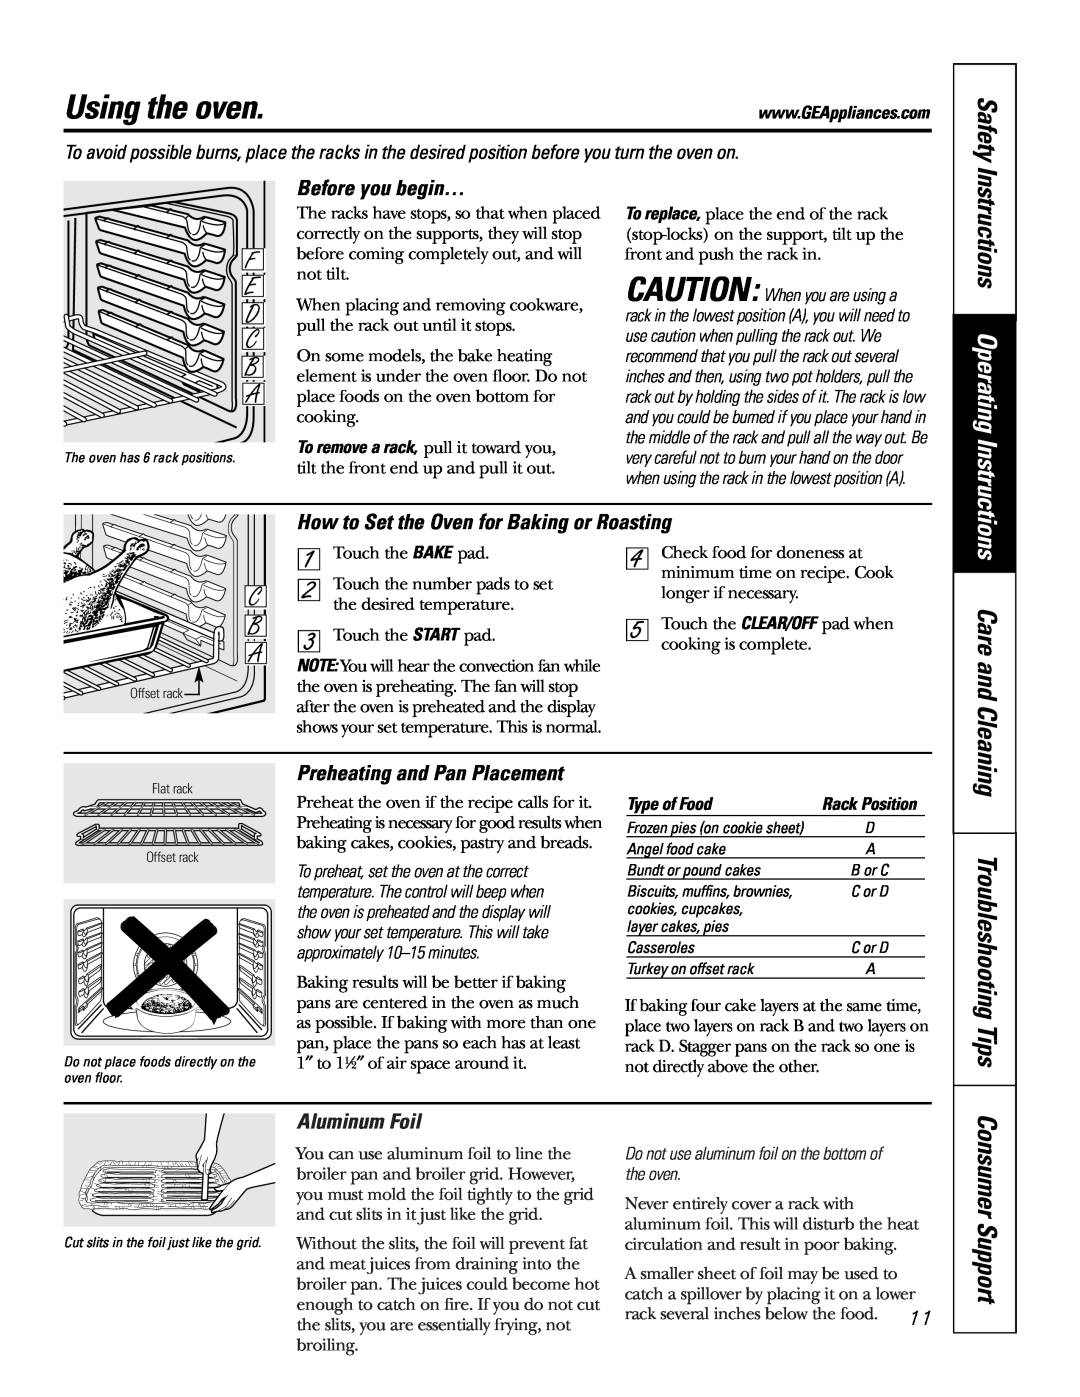 GE JB910 owner manual Using the oven, Before you begin…, Preheating and Pan Placement, Aluminum Foil 